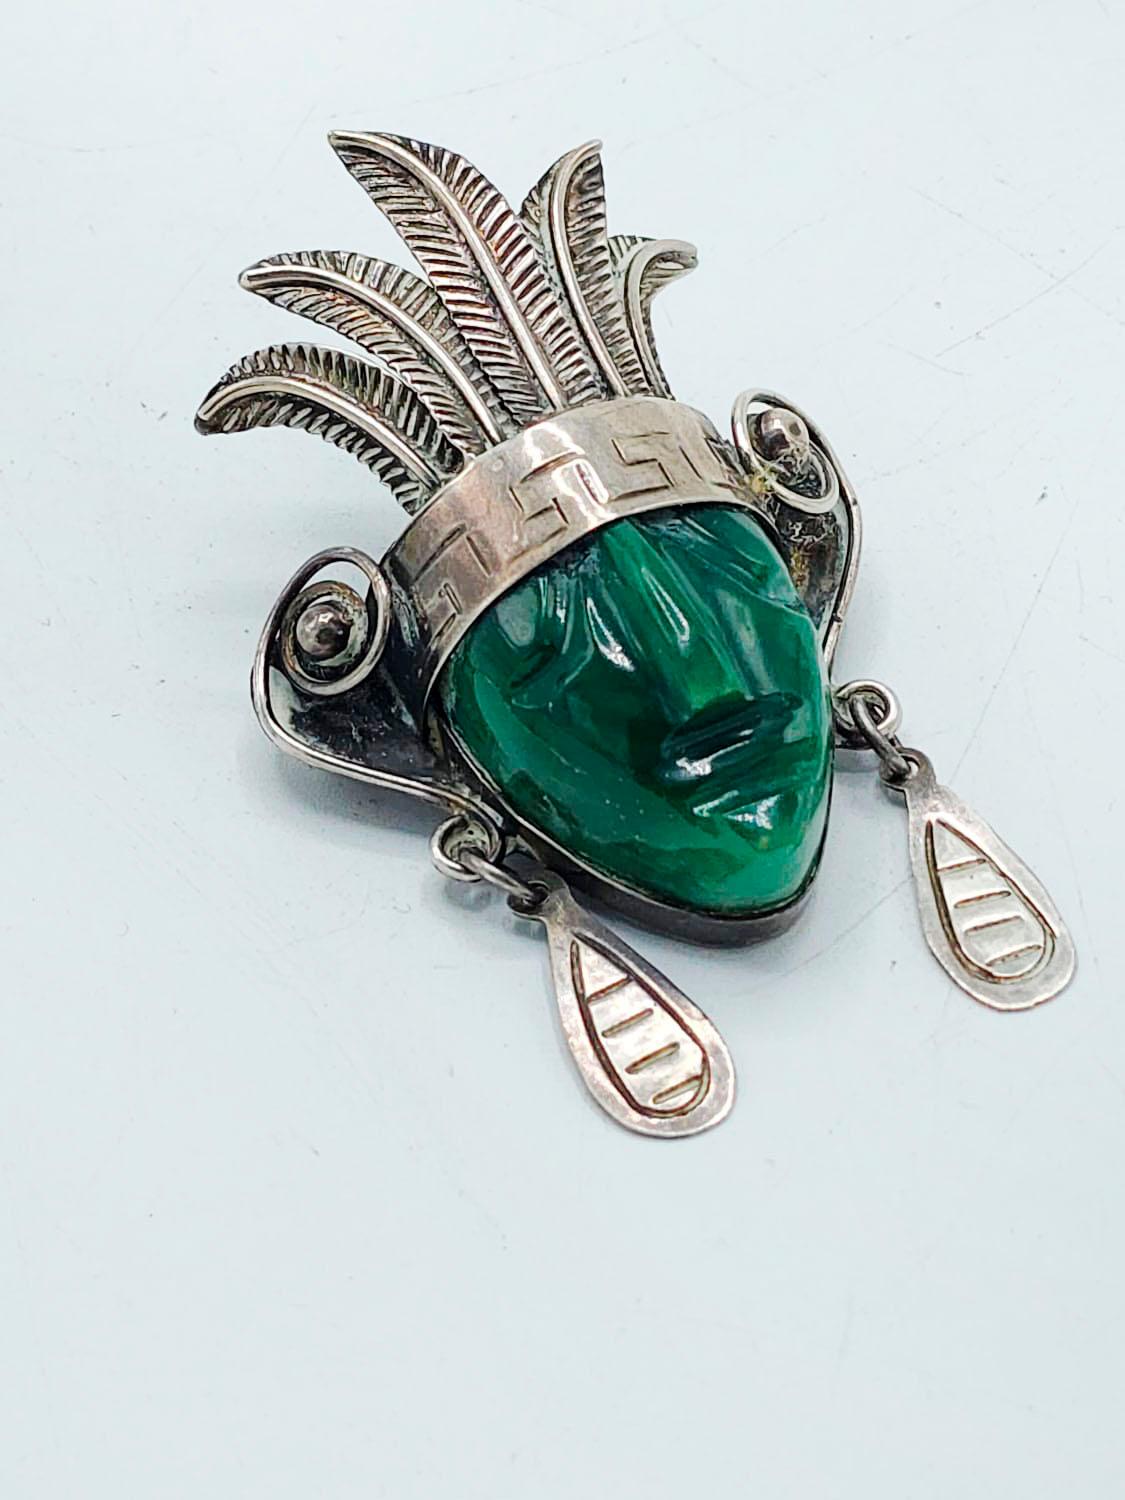 Taxco Sterling Mask Brooch with Large Green Agate and Stamped Details

925 silver brooch with carved details and green agate stone from an ancient Mexican mask is a beautiful piece that stands out on its own.
 Measures:
Heigth: 6 centimeters
Width: